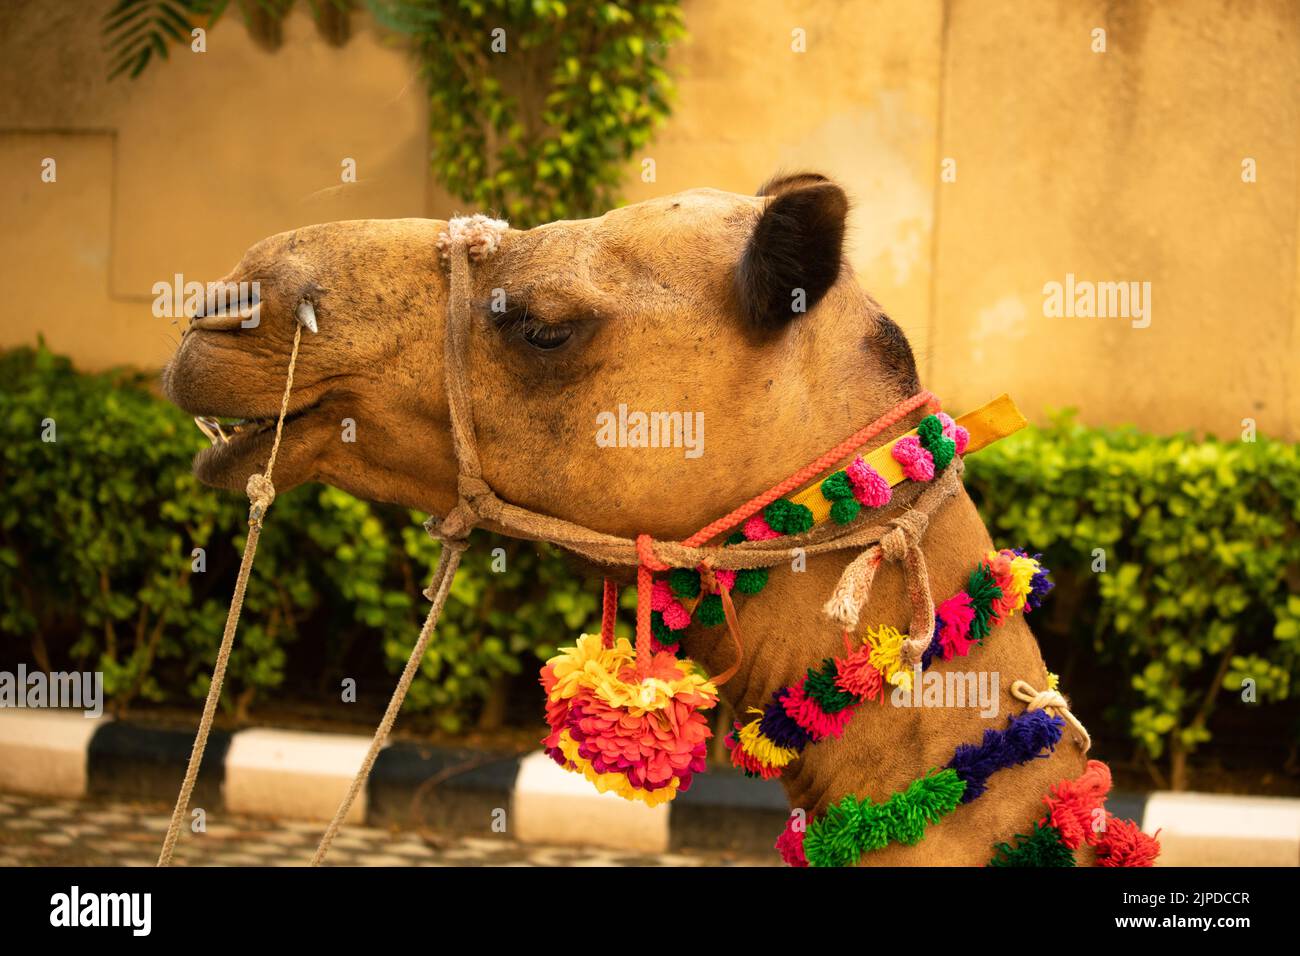 Traditional Decorated Closeup Head Shot Of Indian Camel At Trade Fair Called Mela Or Yatra With Rope String Tied In Mouth And Nose Stock Photo